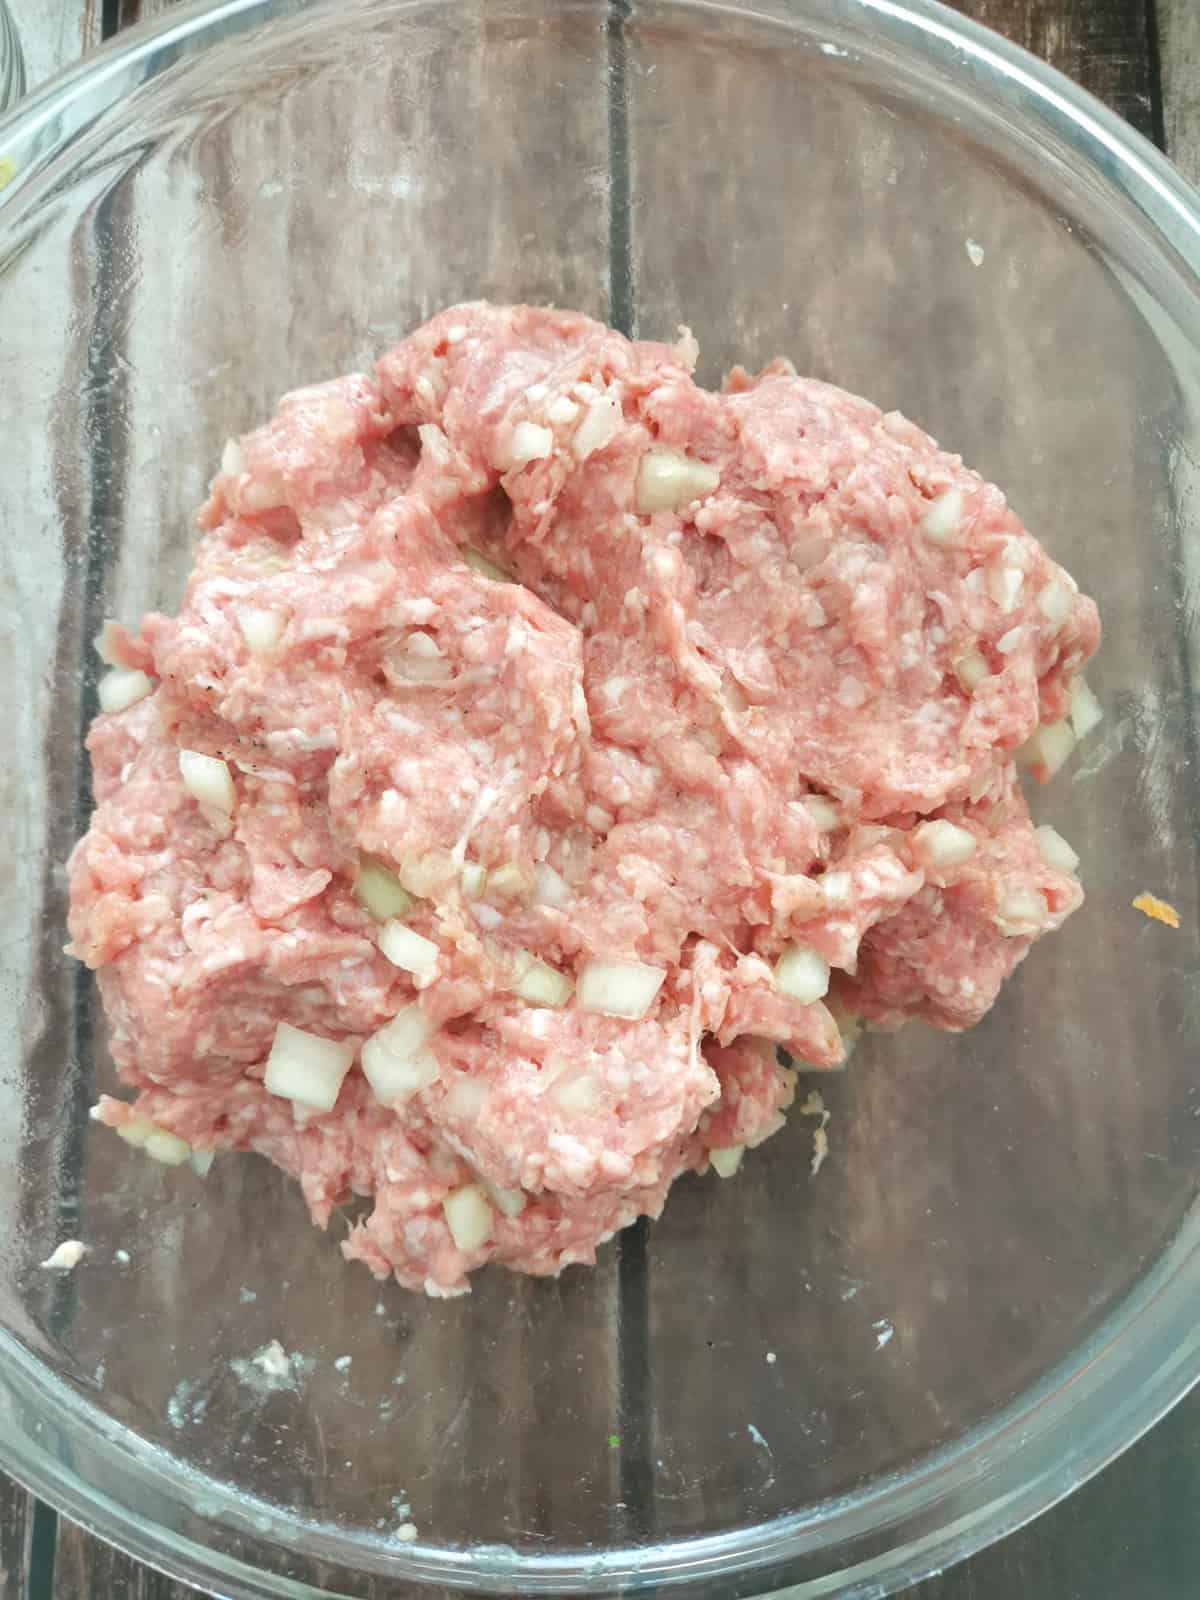 seasoned ground meat in large glass mixing bowl.